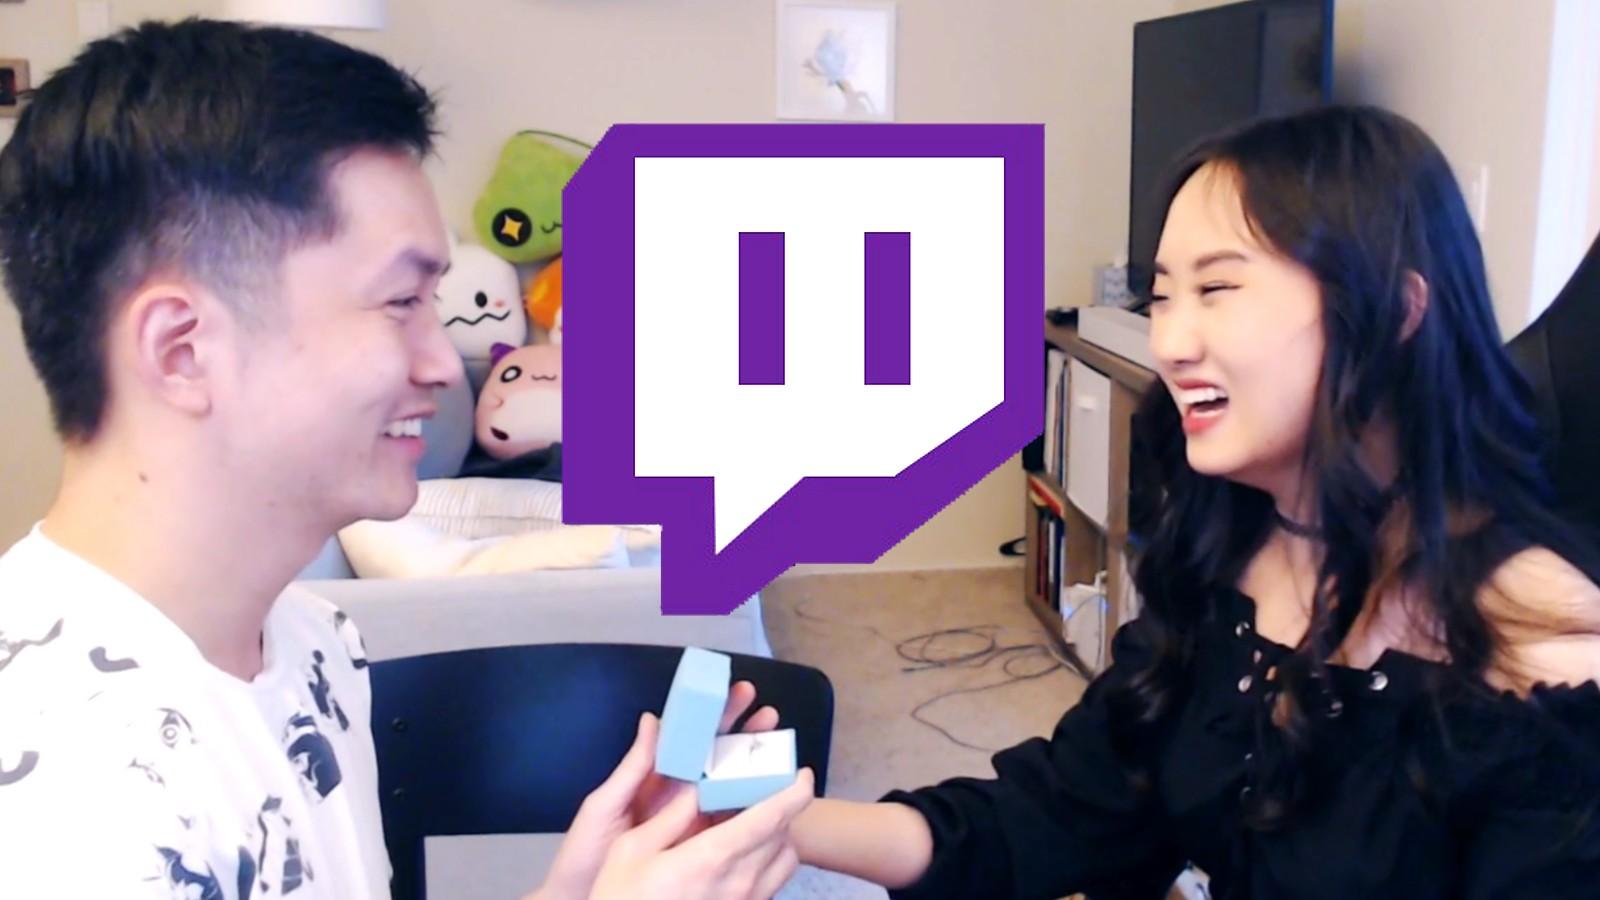 Guy proposes to his girlfriend in a Twitch stream